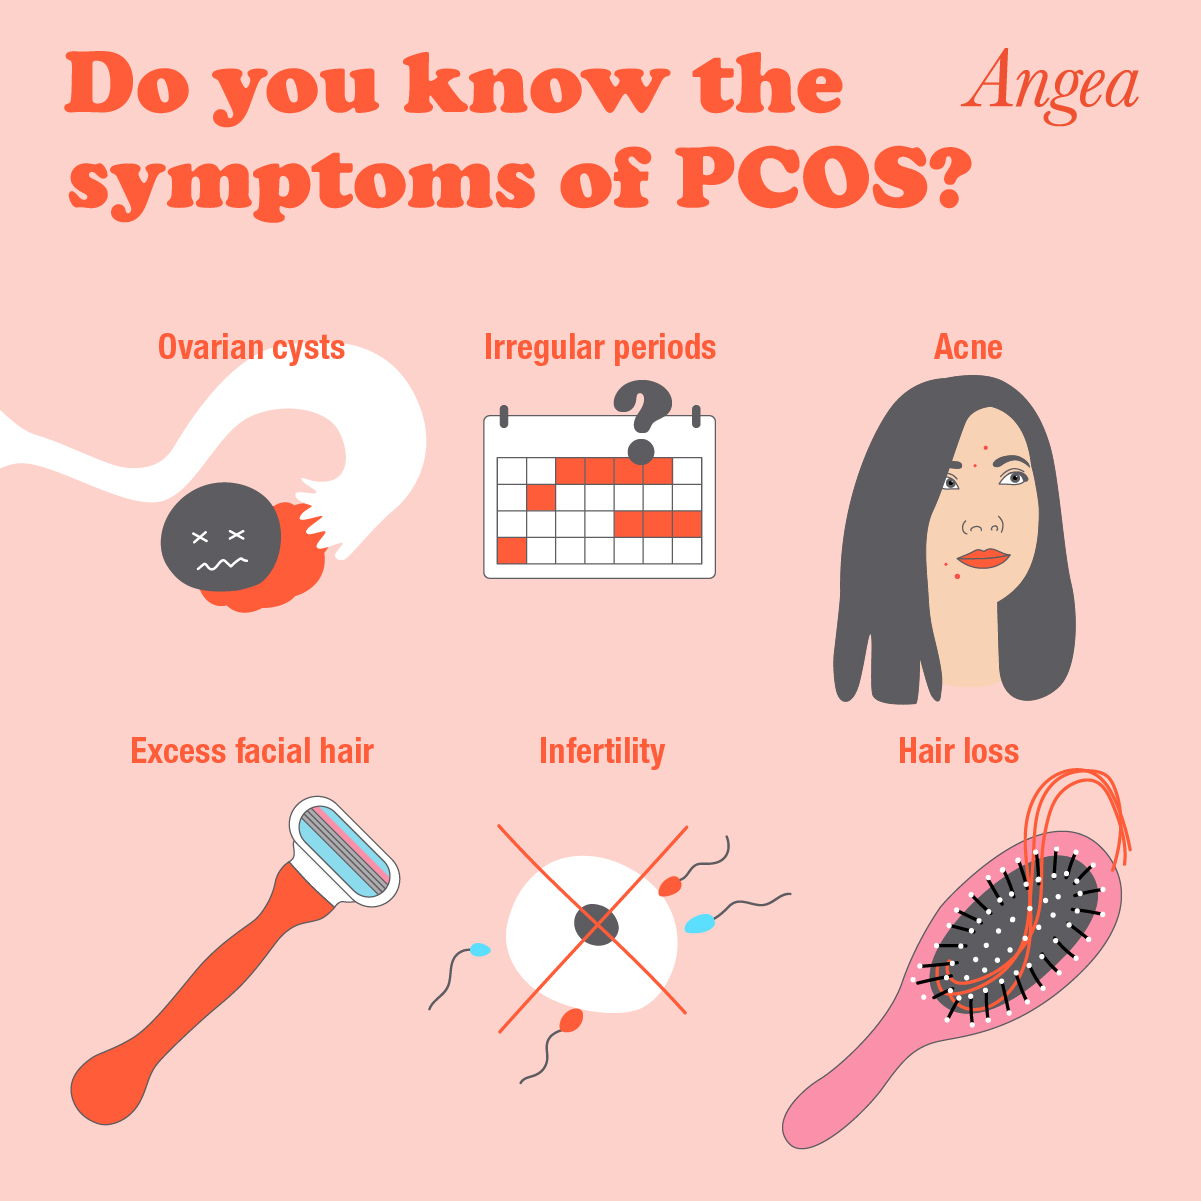 What Are The Symptoms Of PCOS? - Angea